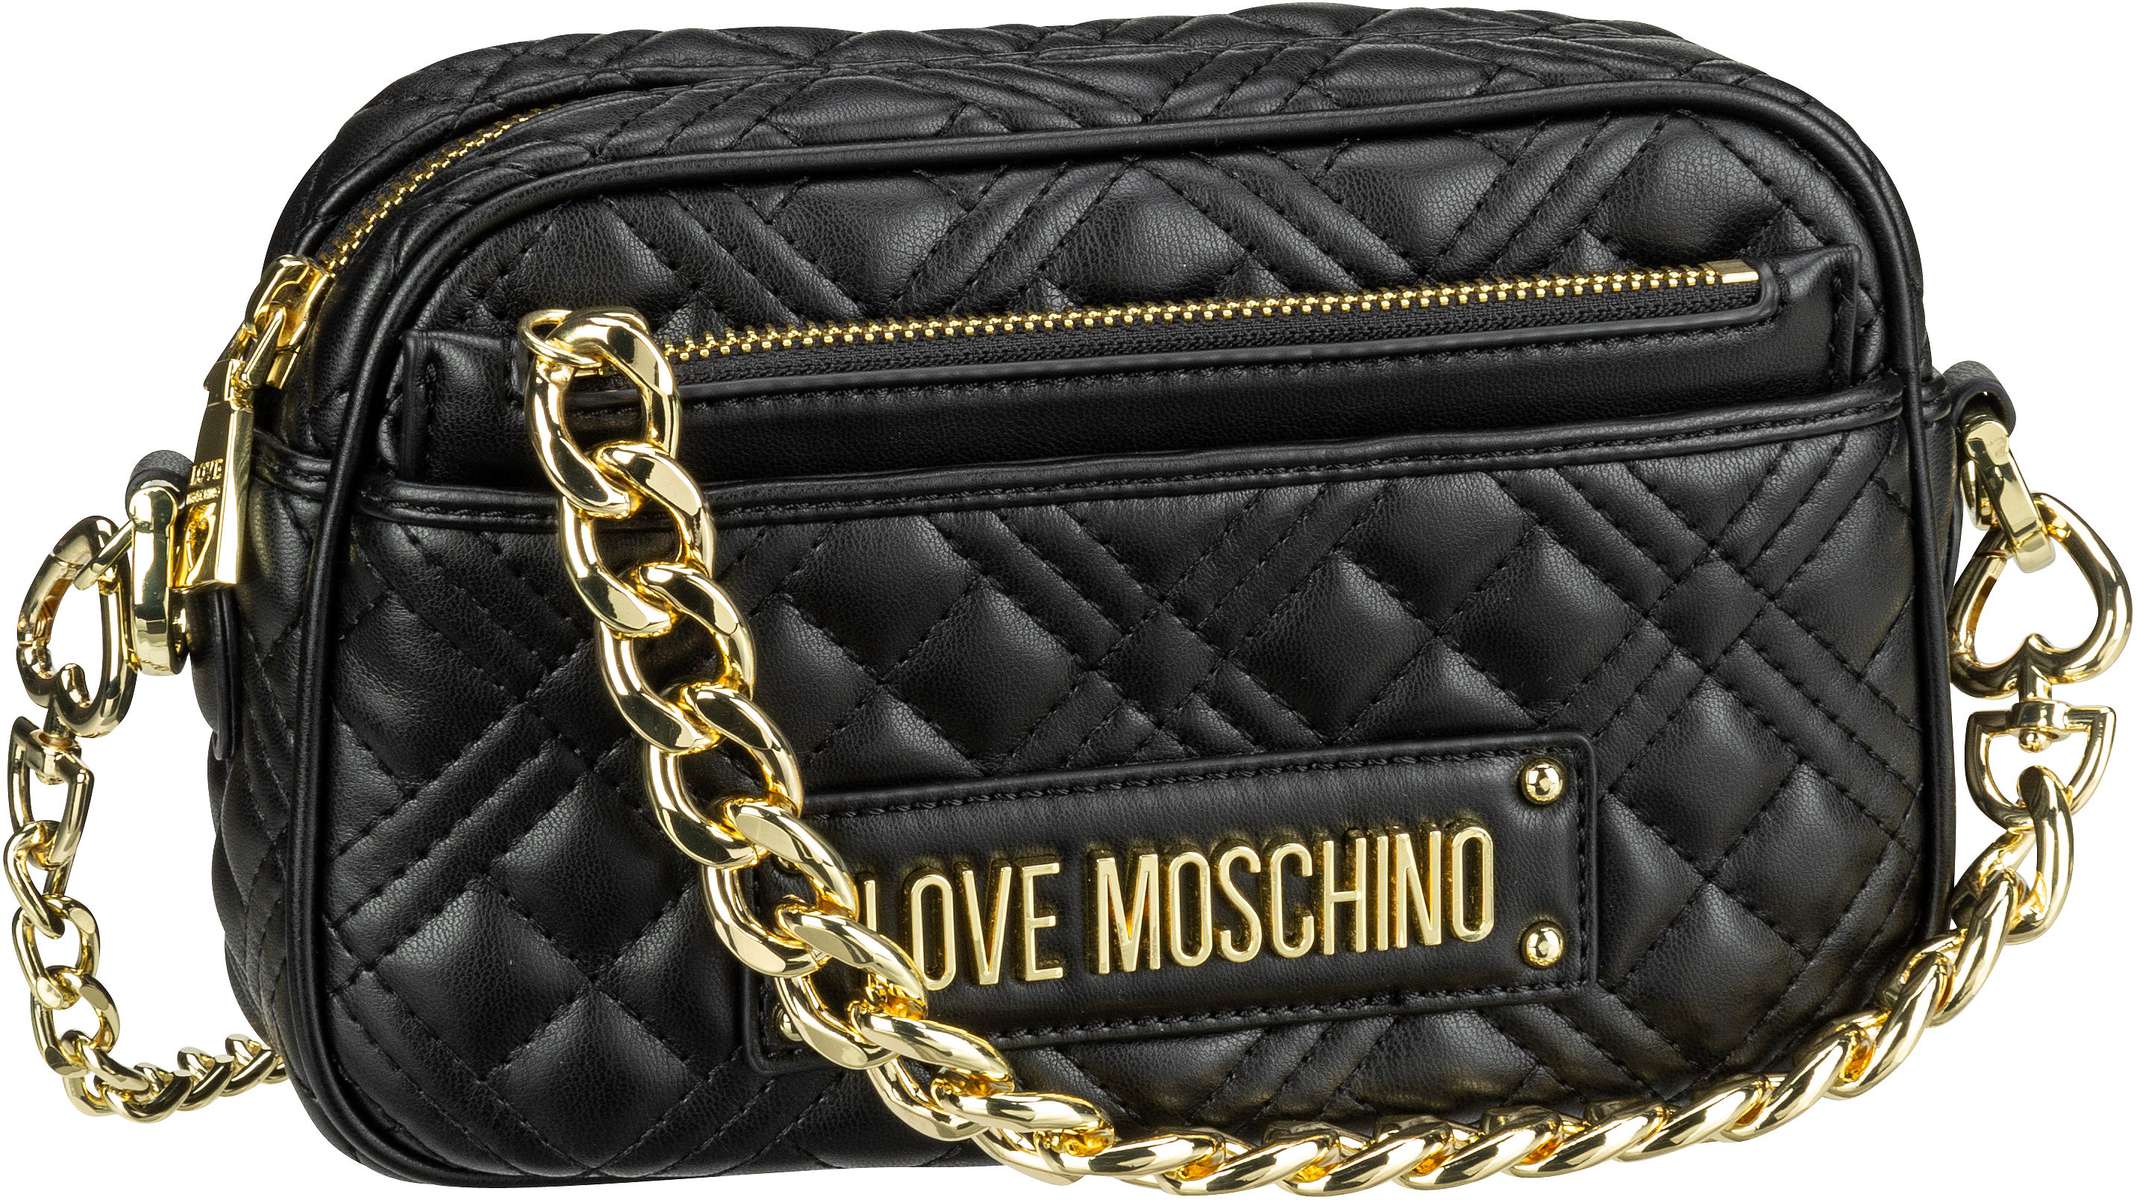 Love Moschino Quilted Bag Pocket 4017 - Black